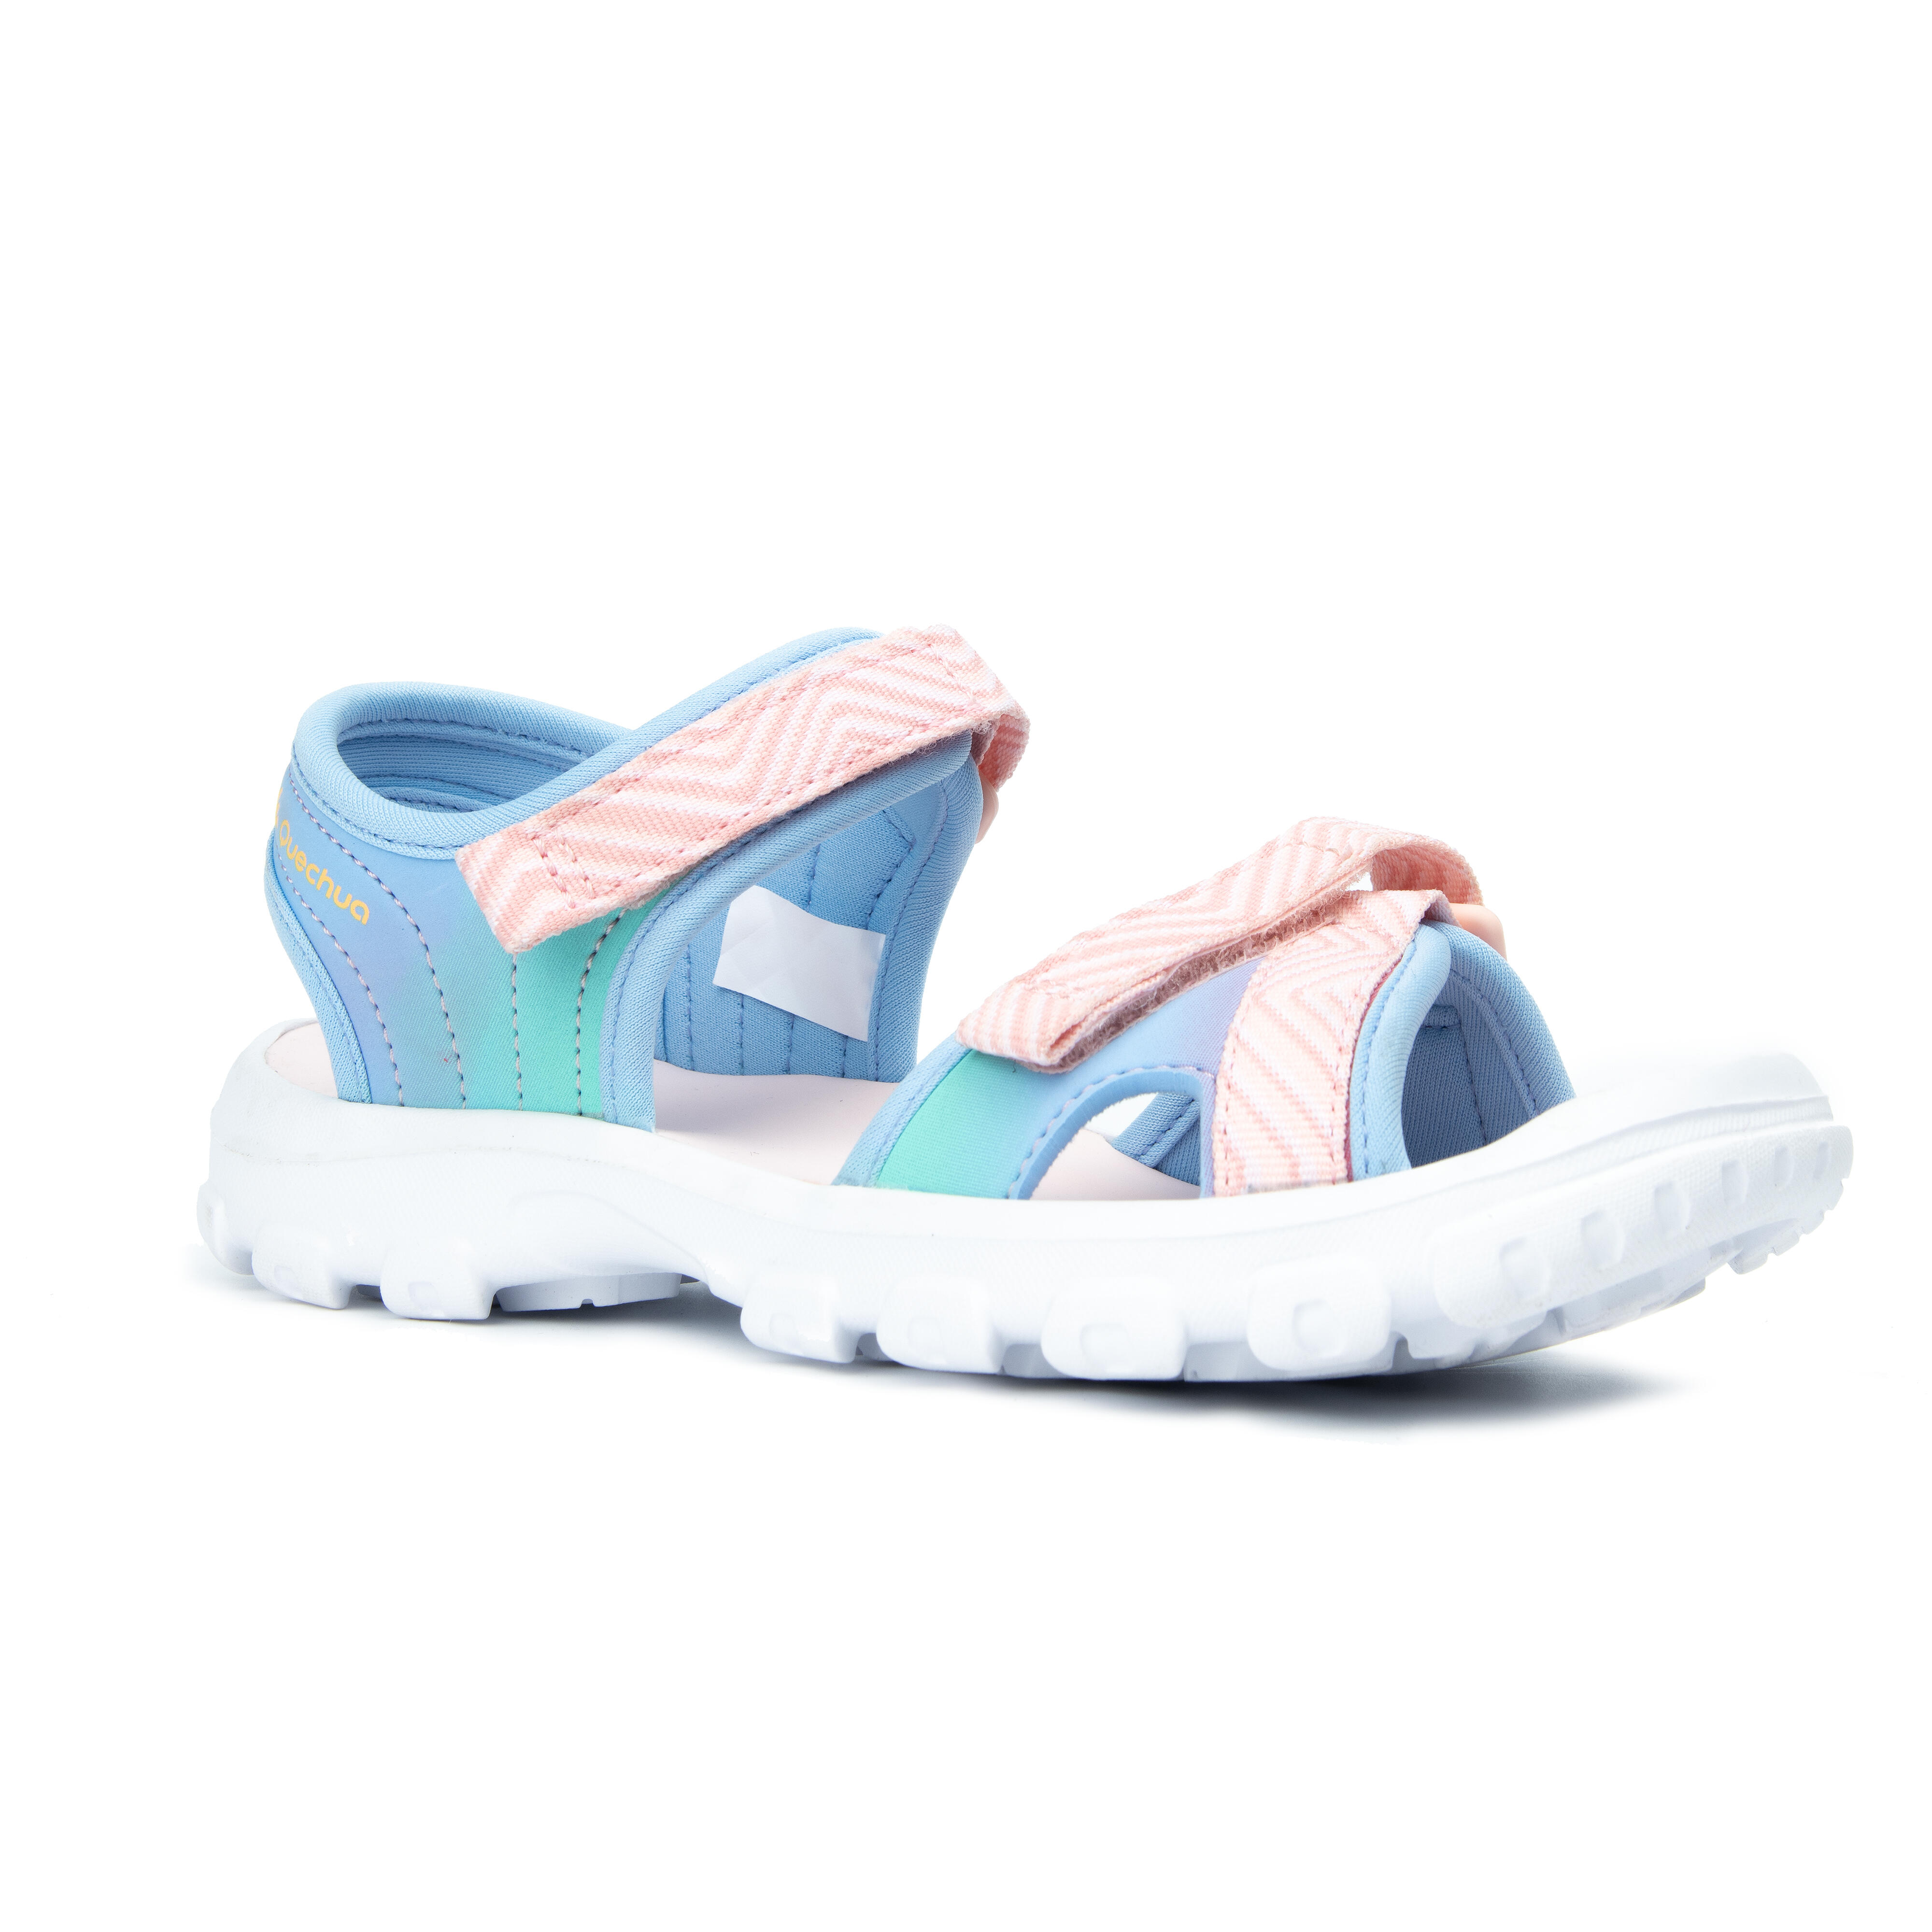 Baby Sandals Pool Shoes - Pink - Decathlon